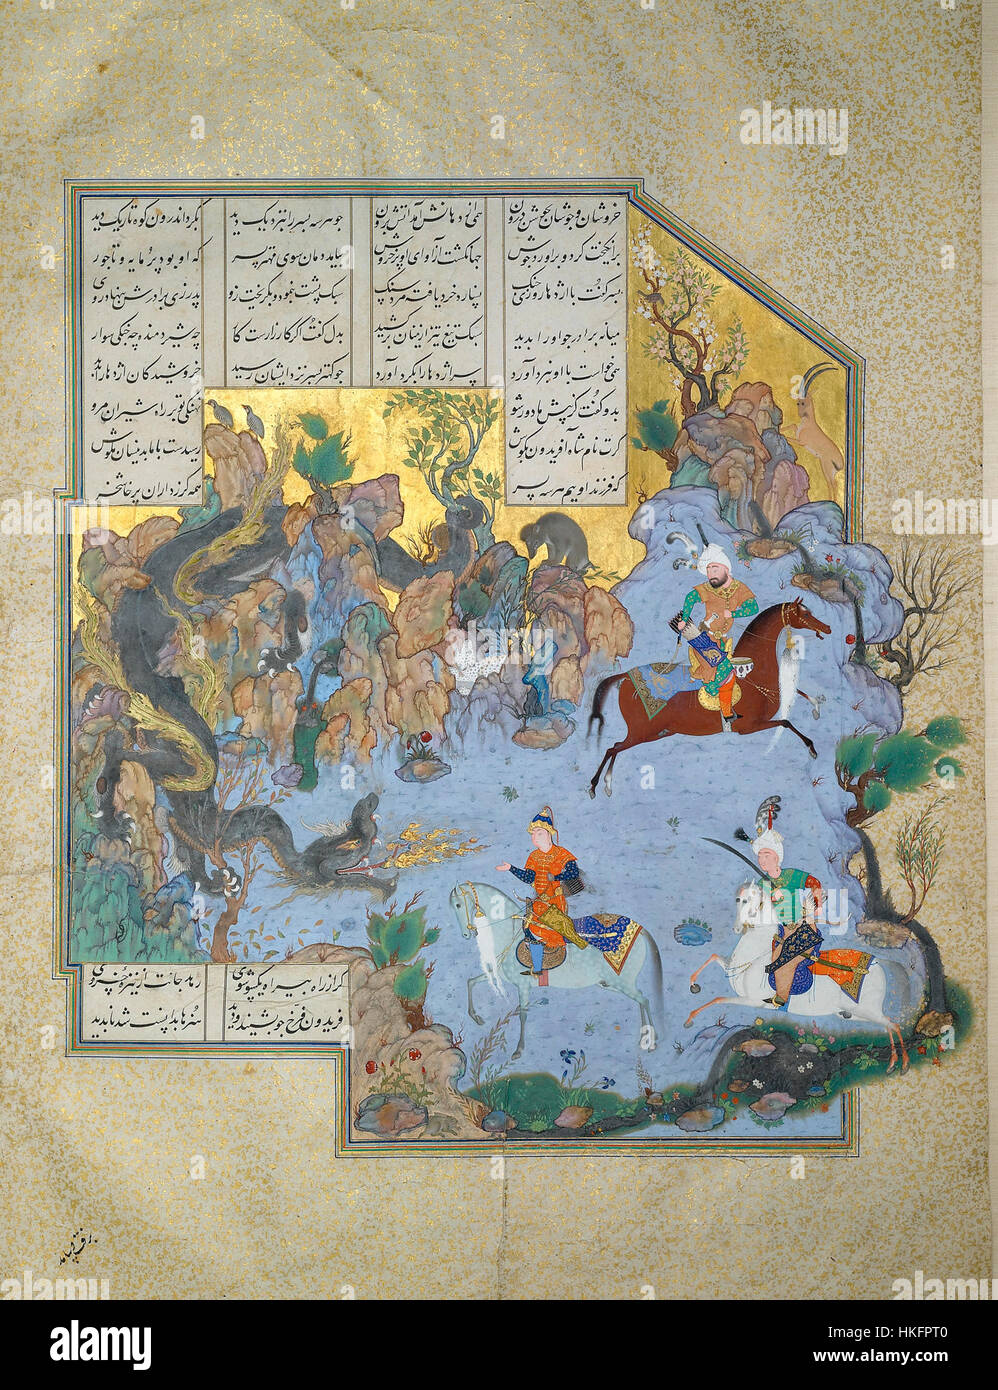 FOLIO FROM THE SHAHNAMEH OF SHAH TAHMASP, ATTRIBUTED TO AQA MIRAK, CIRCA 1525 35, Sotheby,s Stock Photo